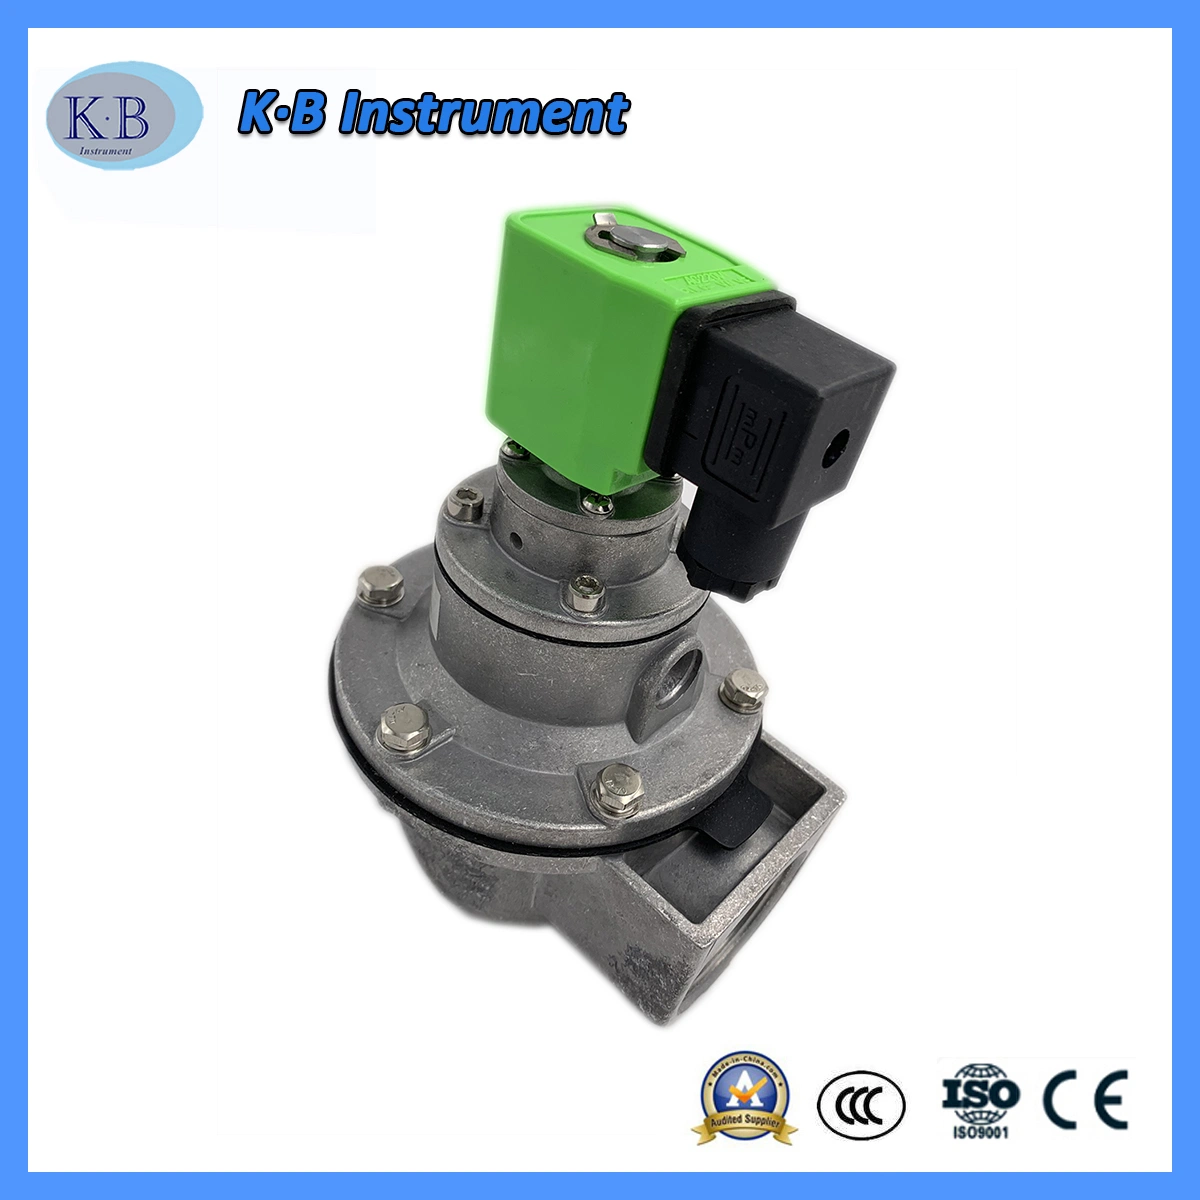 AC220V IP65 Pneumatic Electromagnetic Solenoid Pulse Jet Valve for Air Control